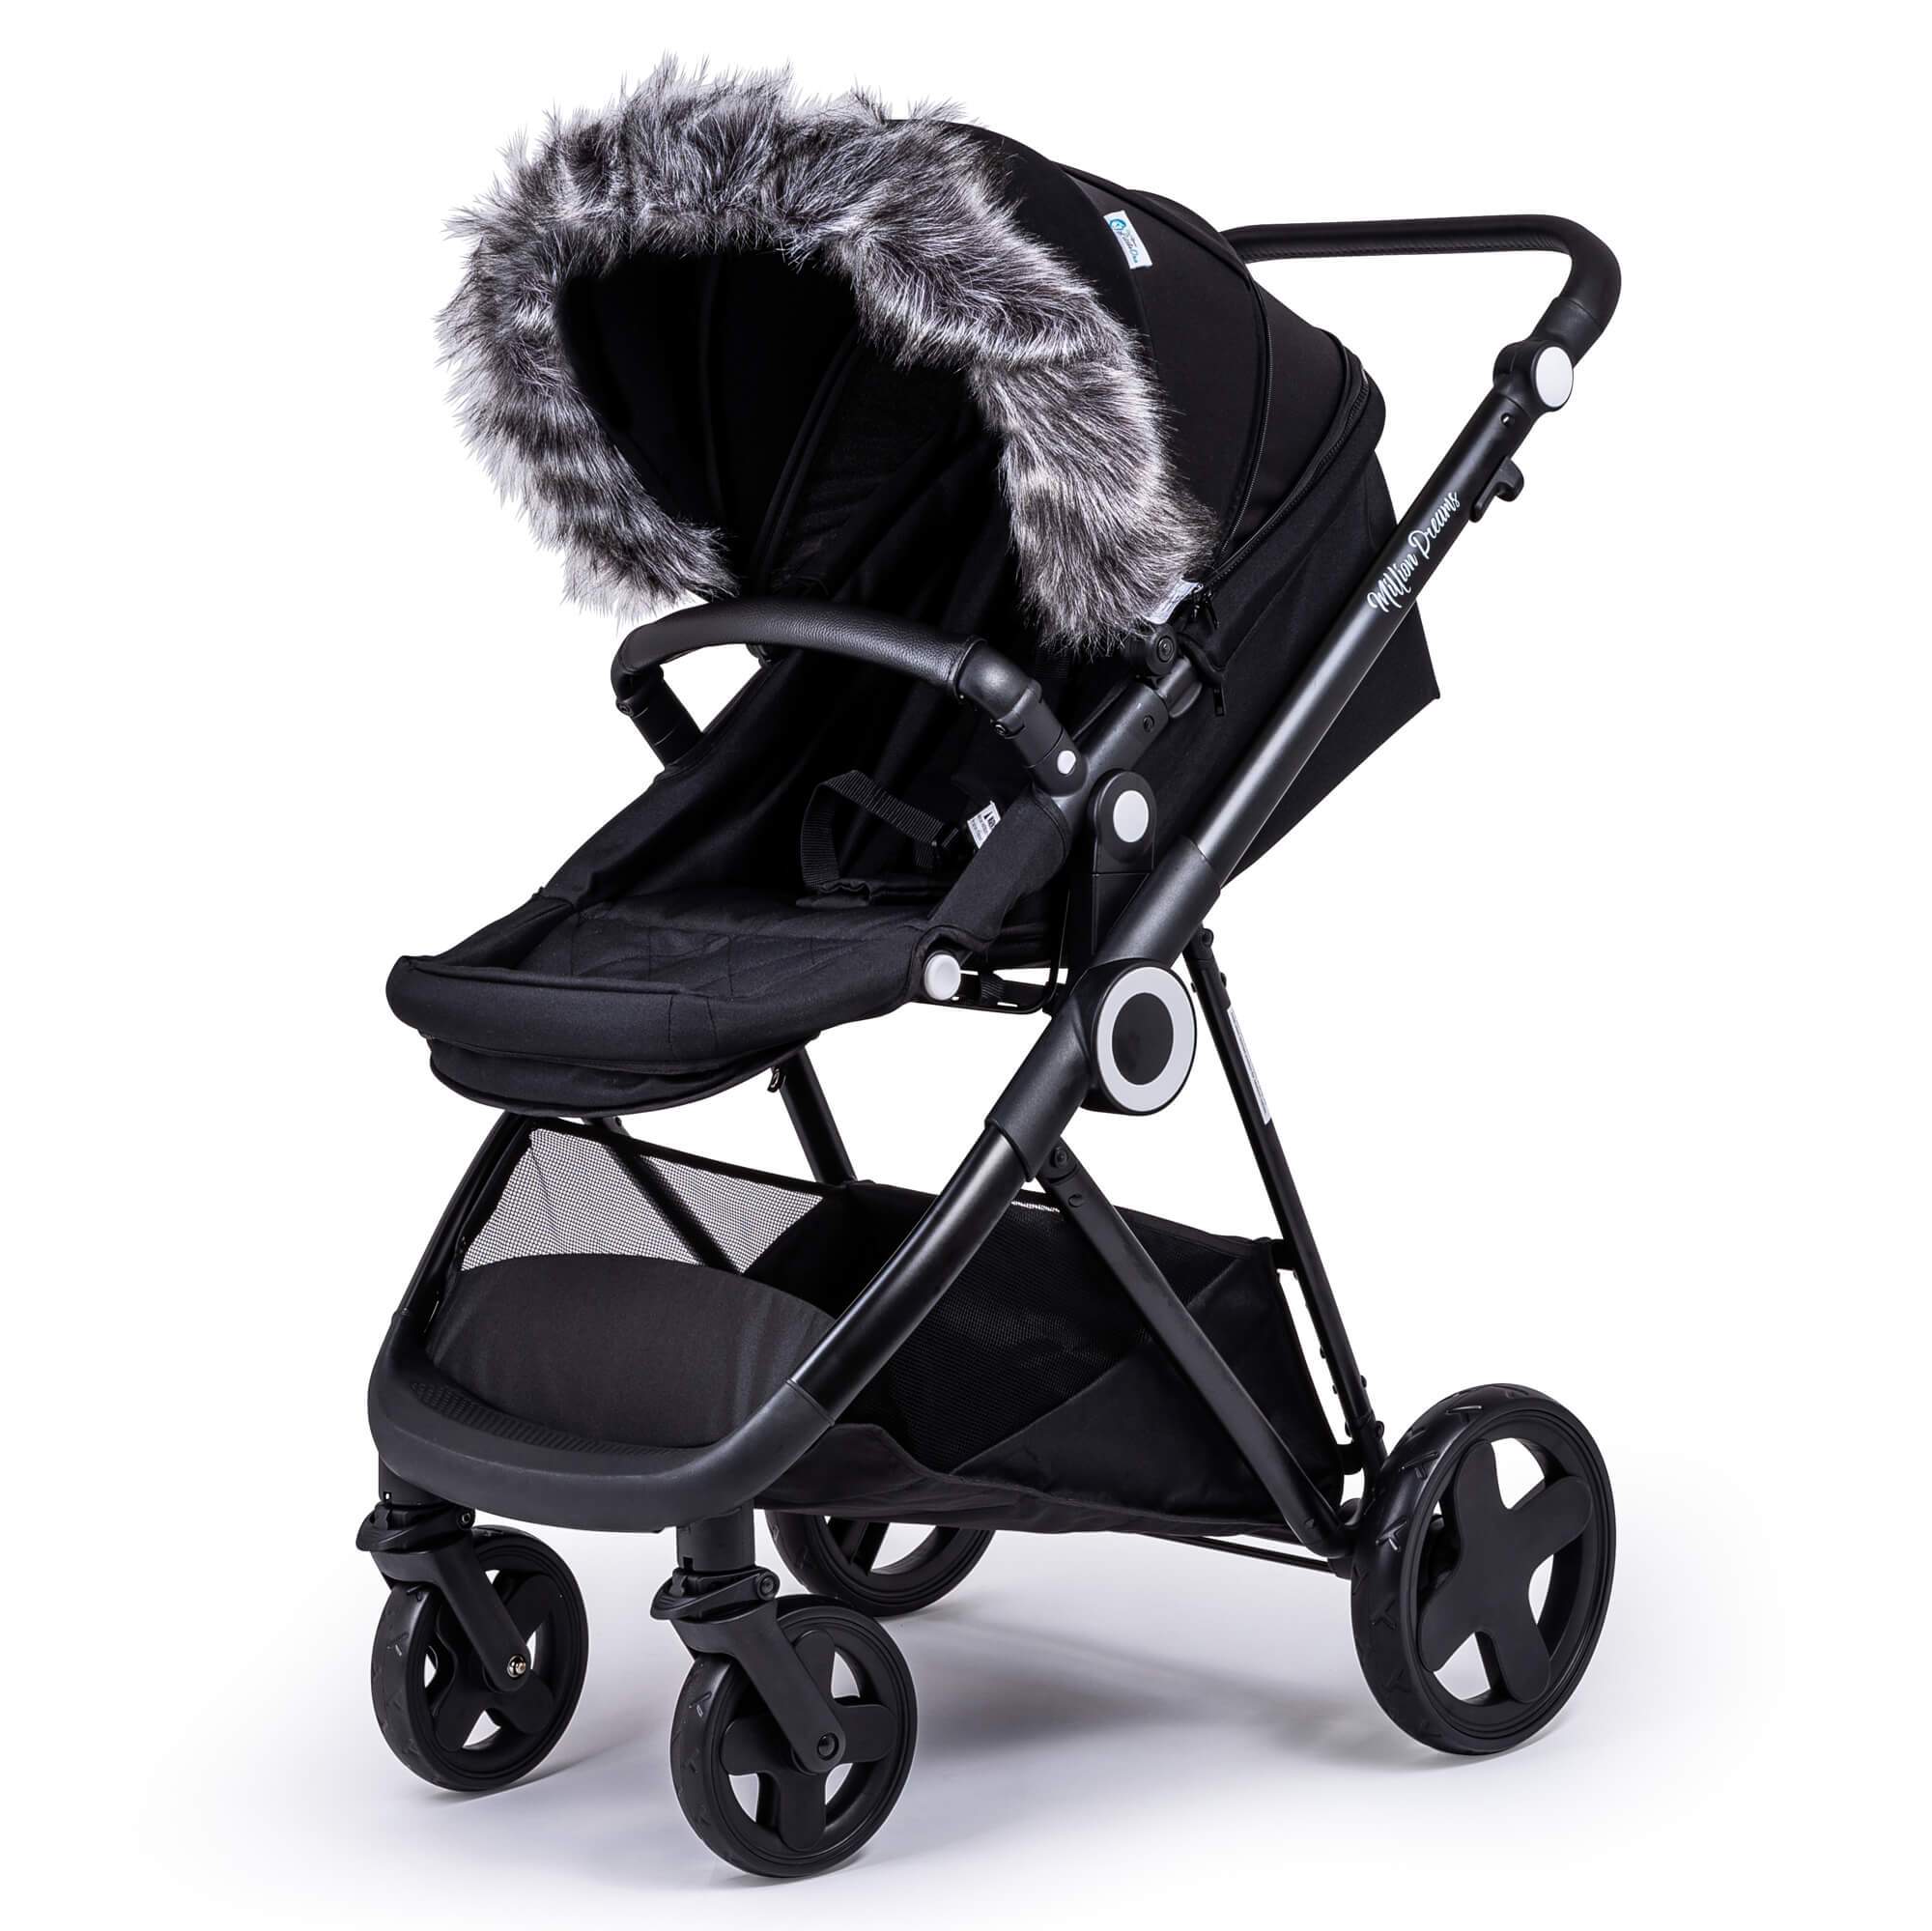 Pram Fur Hood Trim Attachment for Pushchair Compatible with Cybex - Dark Grey / Fits All Models | For Your Little One